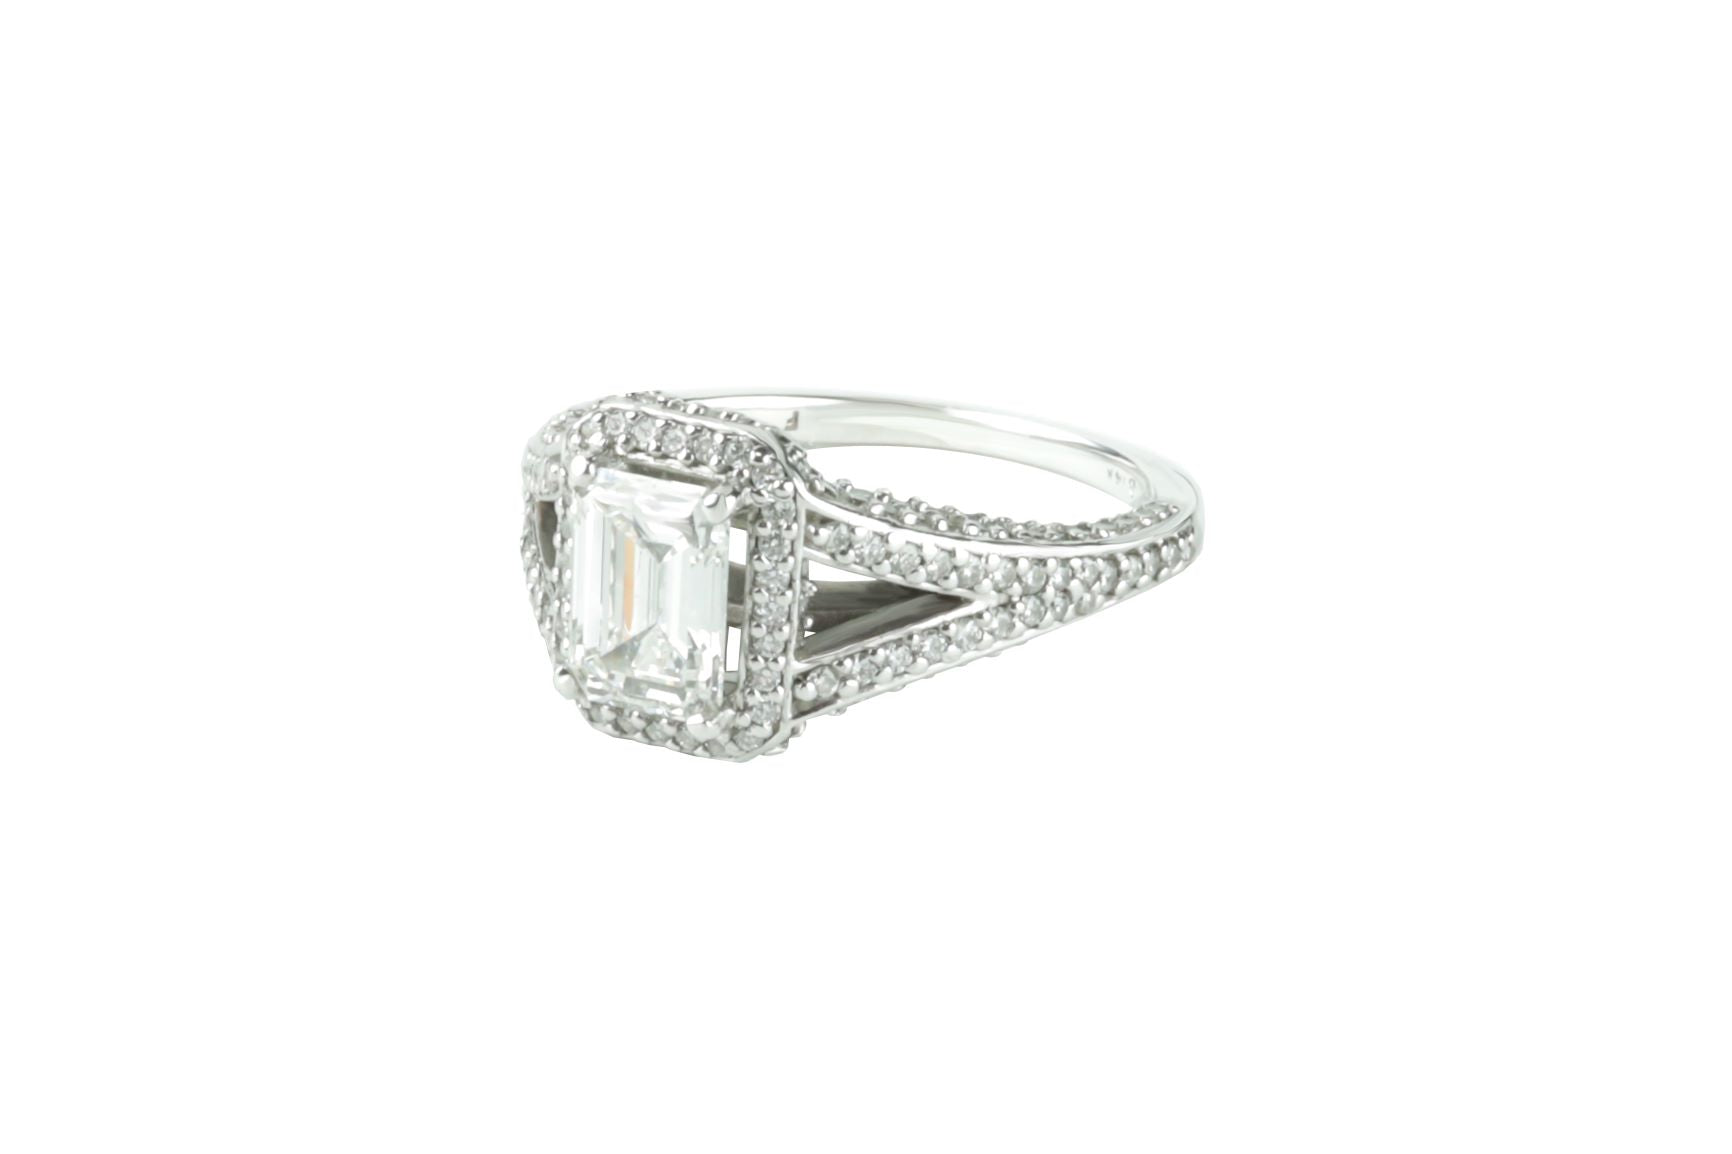 1.81 ctw GIA Certified Emerald Cut Diamond Engagement Ring